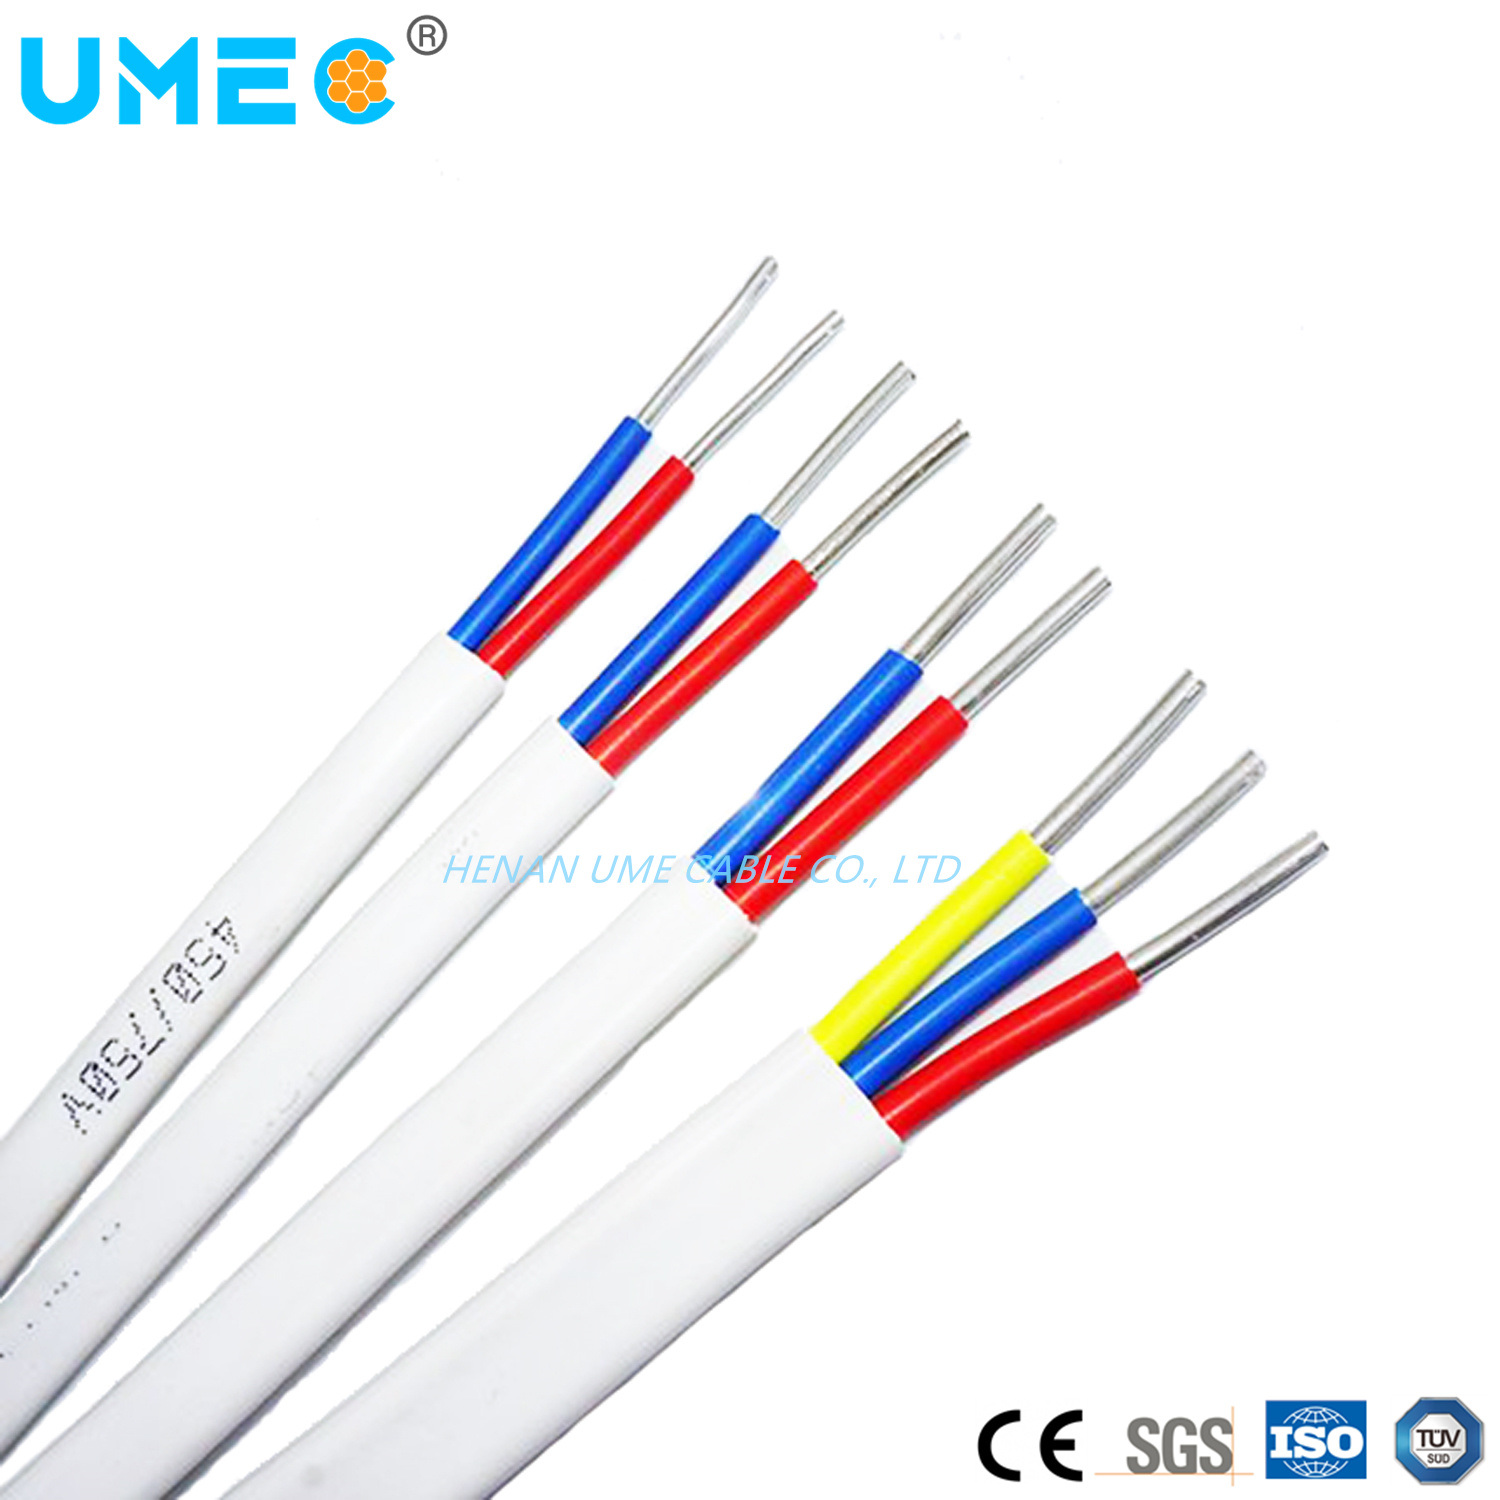 Australian Standard AS/NZS 5000.2 PVC Insulated and Sheath 2*2.5+2.5 PVC Wire 3*2.5mm Flat TPS Cable Wire